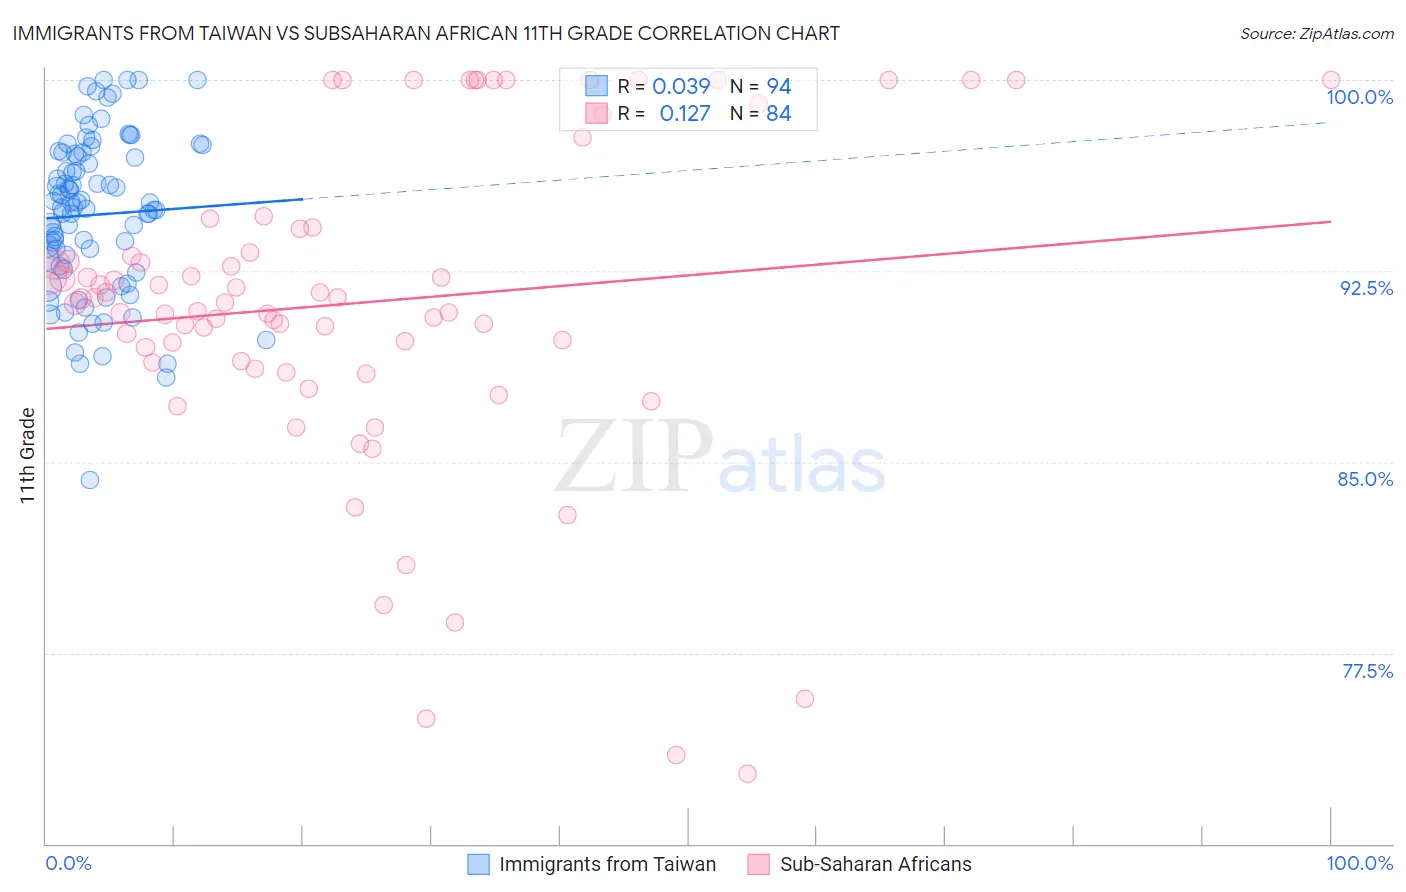 Immigrants from Taiwan vs Subsaharan African 11th Grade